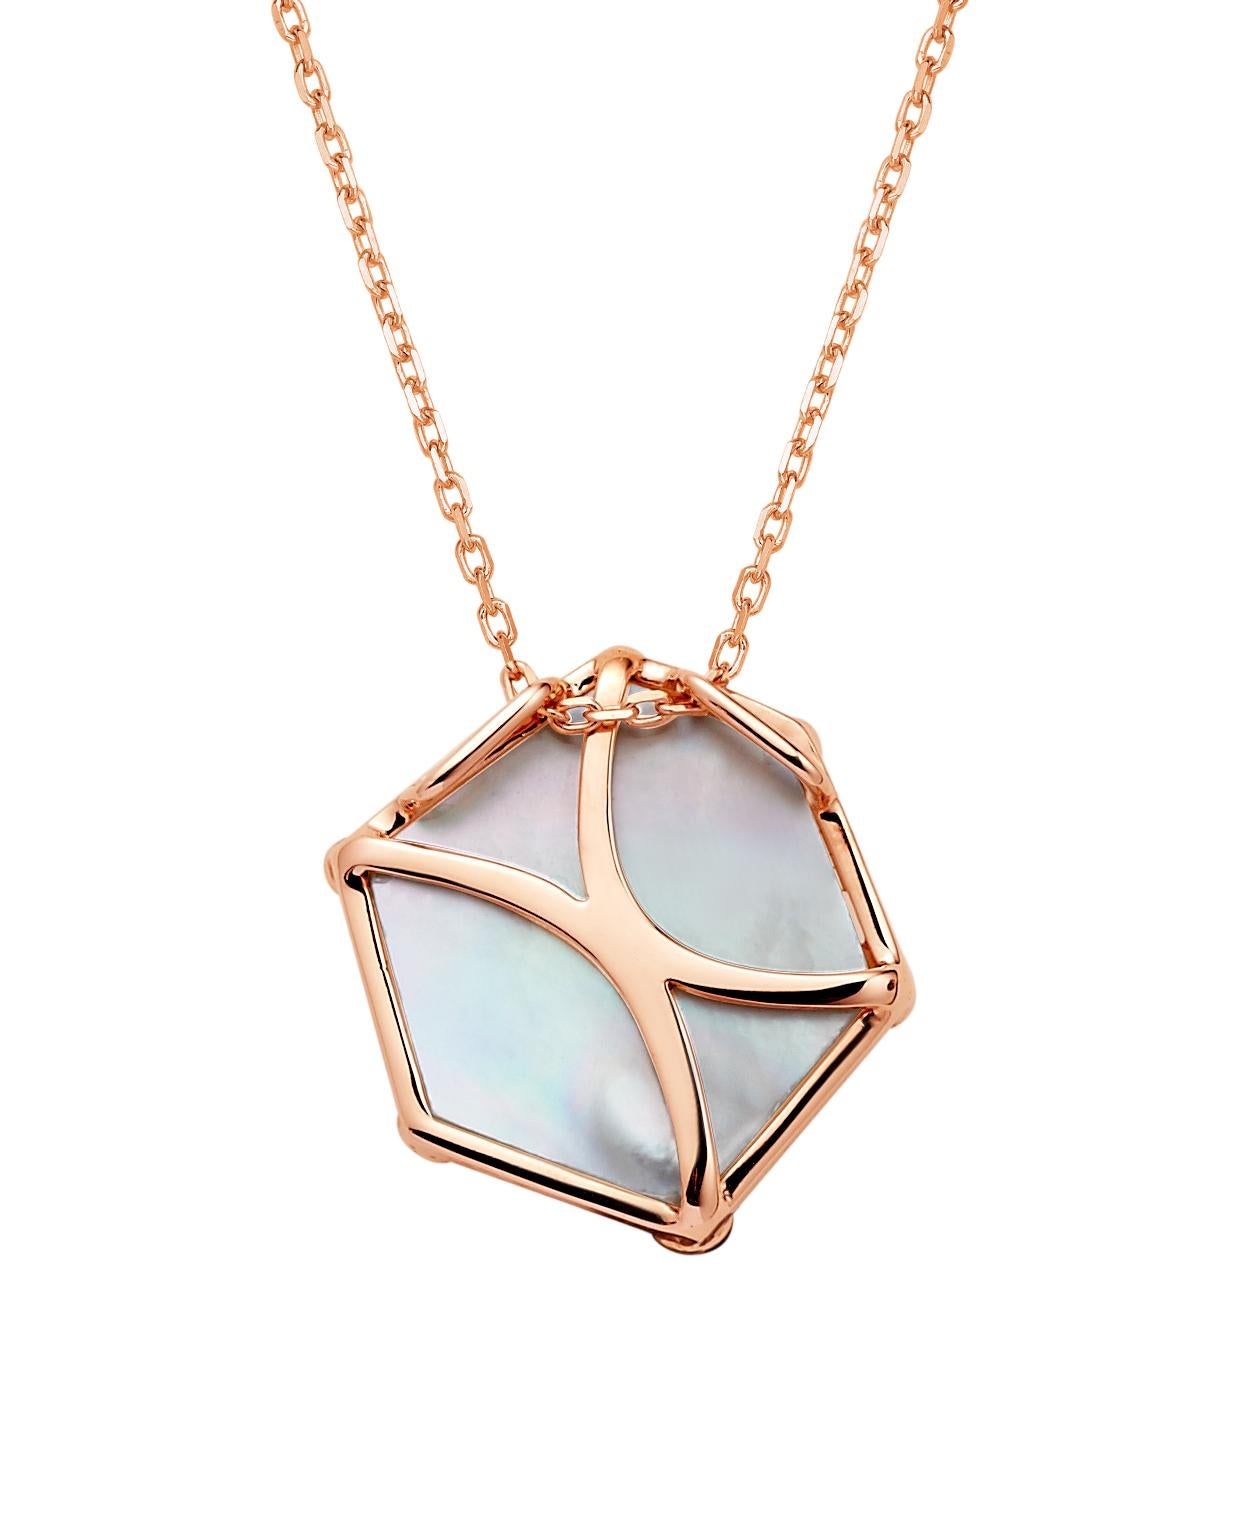 Contemporary Fei Liu Mother of Pearl Pink Sapphire 18 Karat Rose Gold Hexagon Necklace